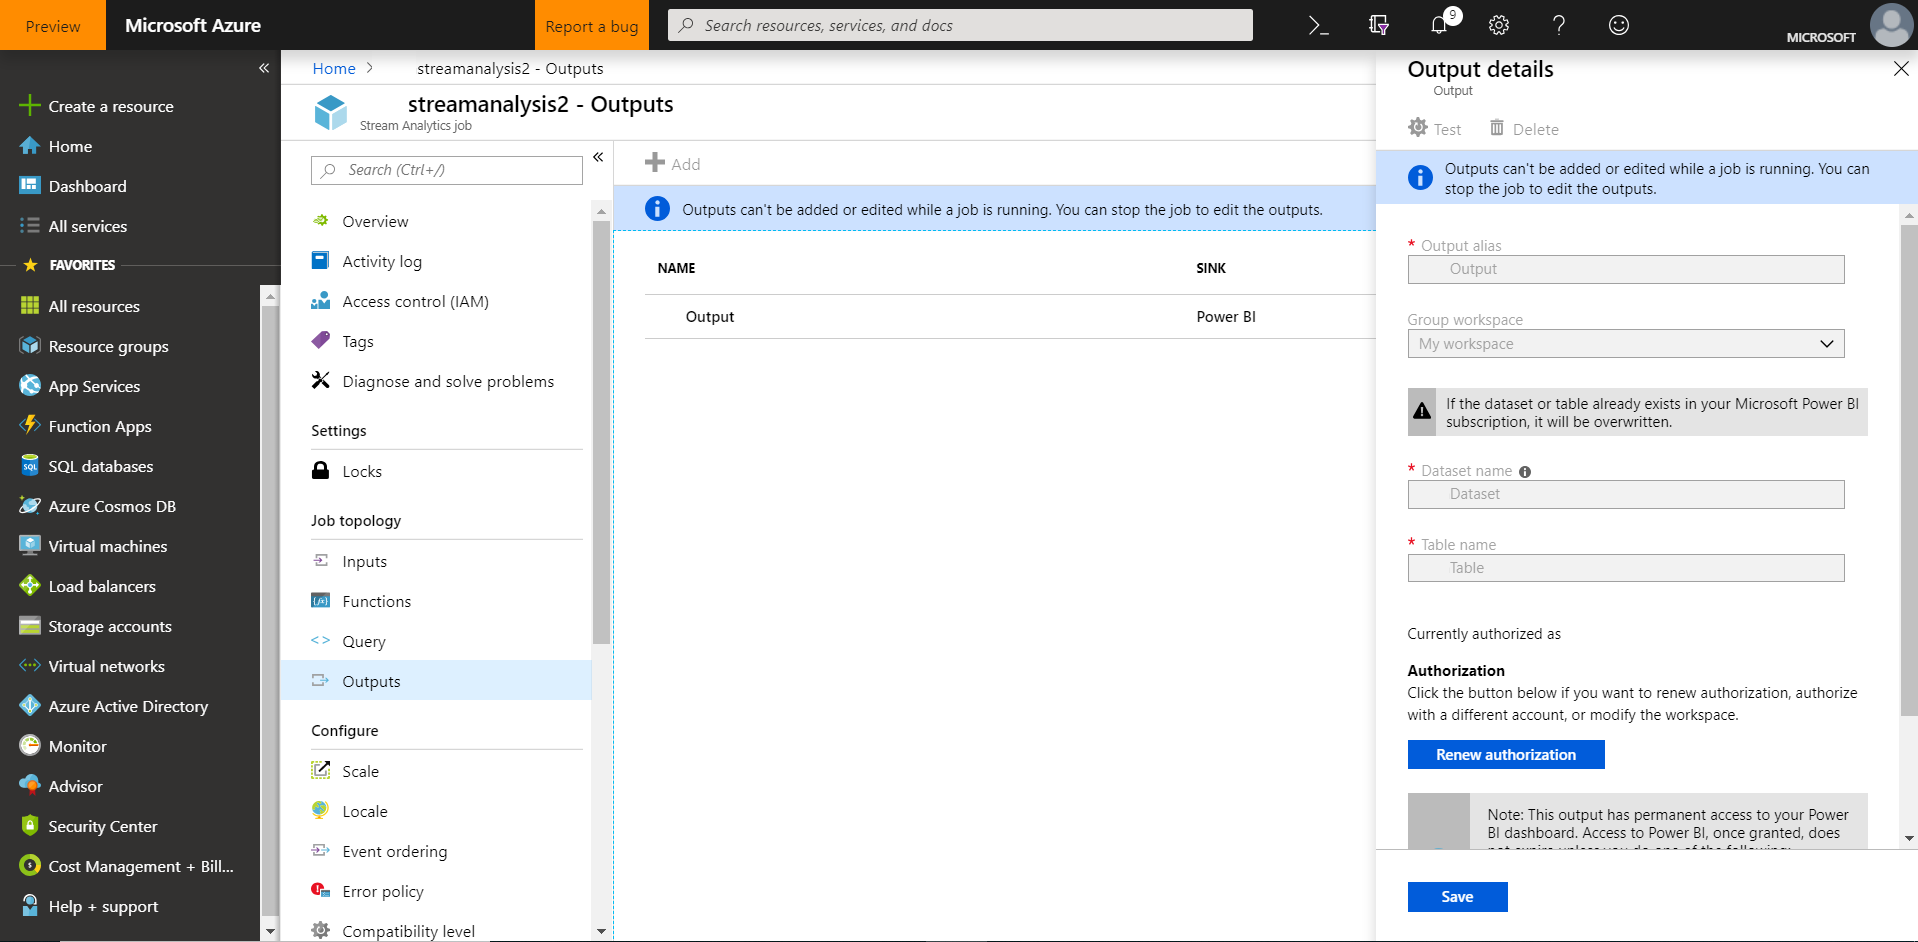 Add an output to a Stream Analytics job in Azure